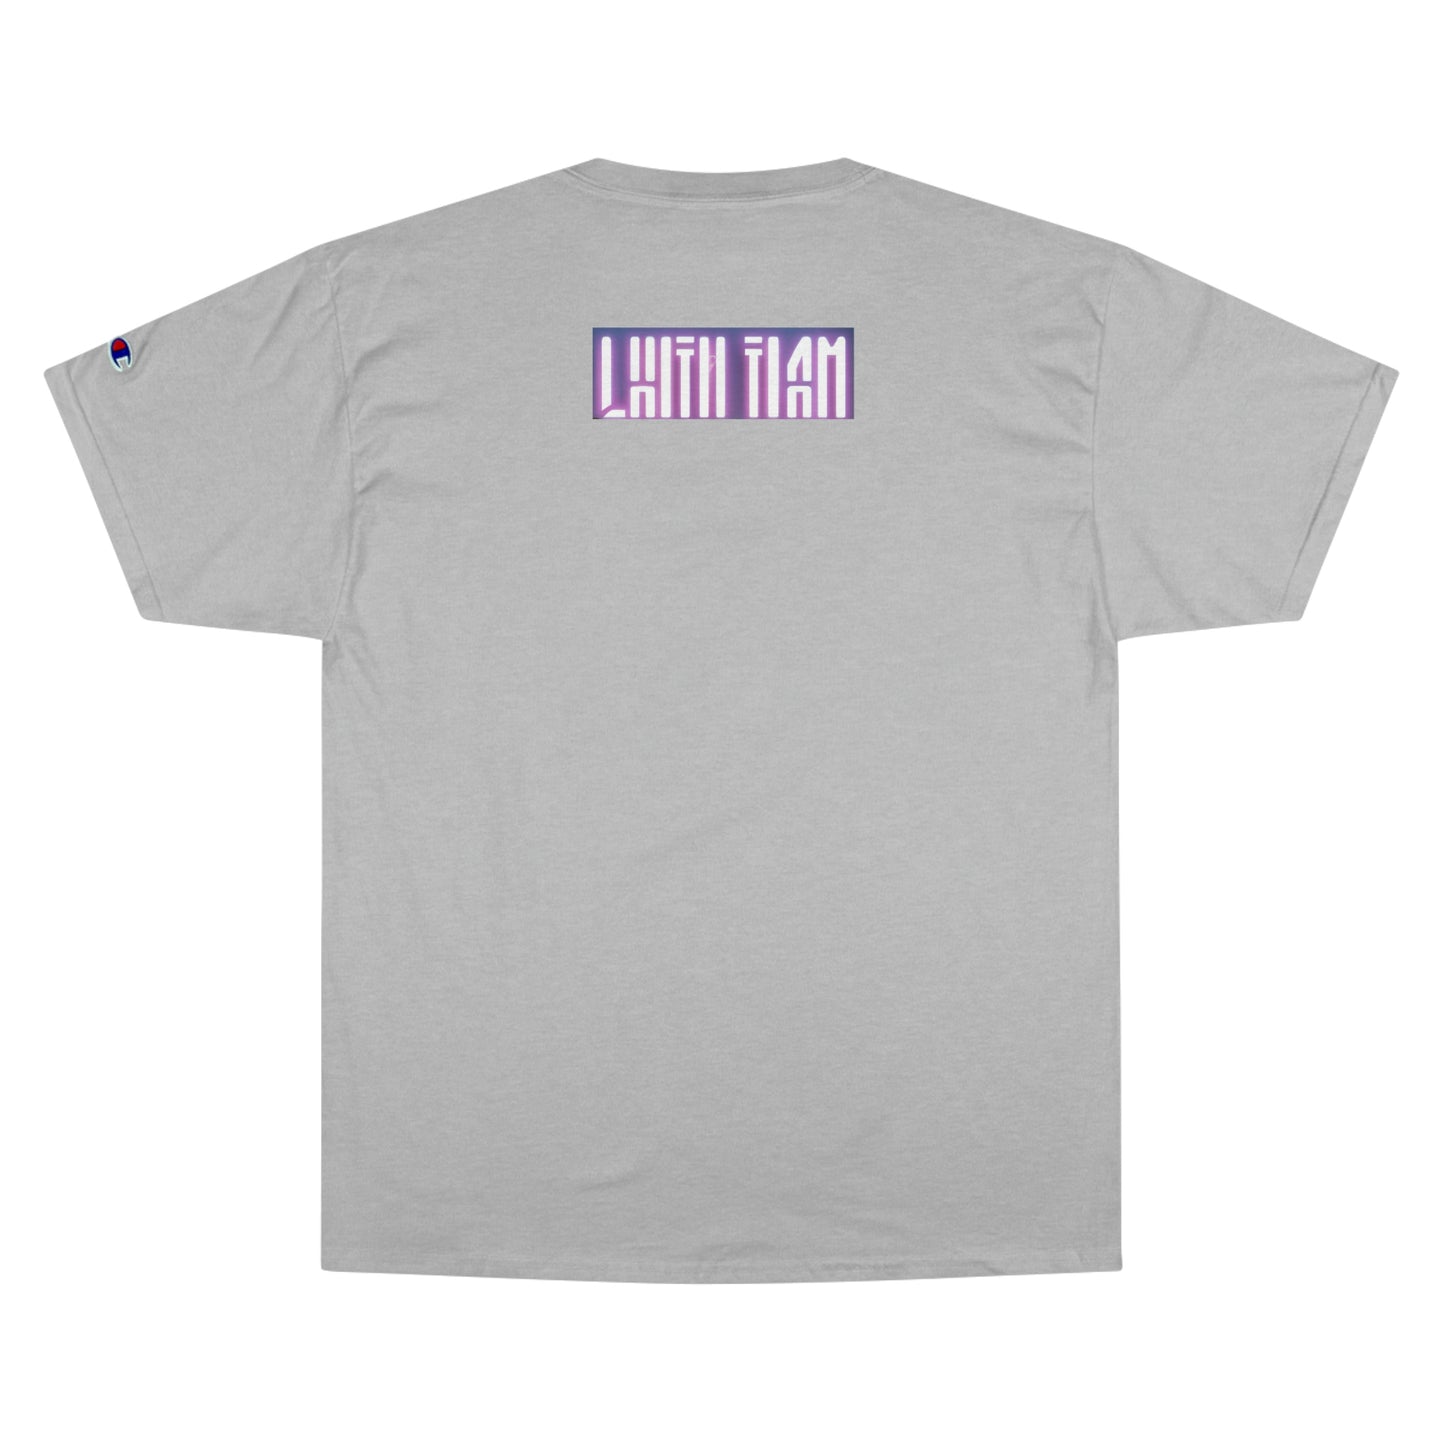 Atziluth Gallery x Champion "Beam is Lit" T-shirt